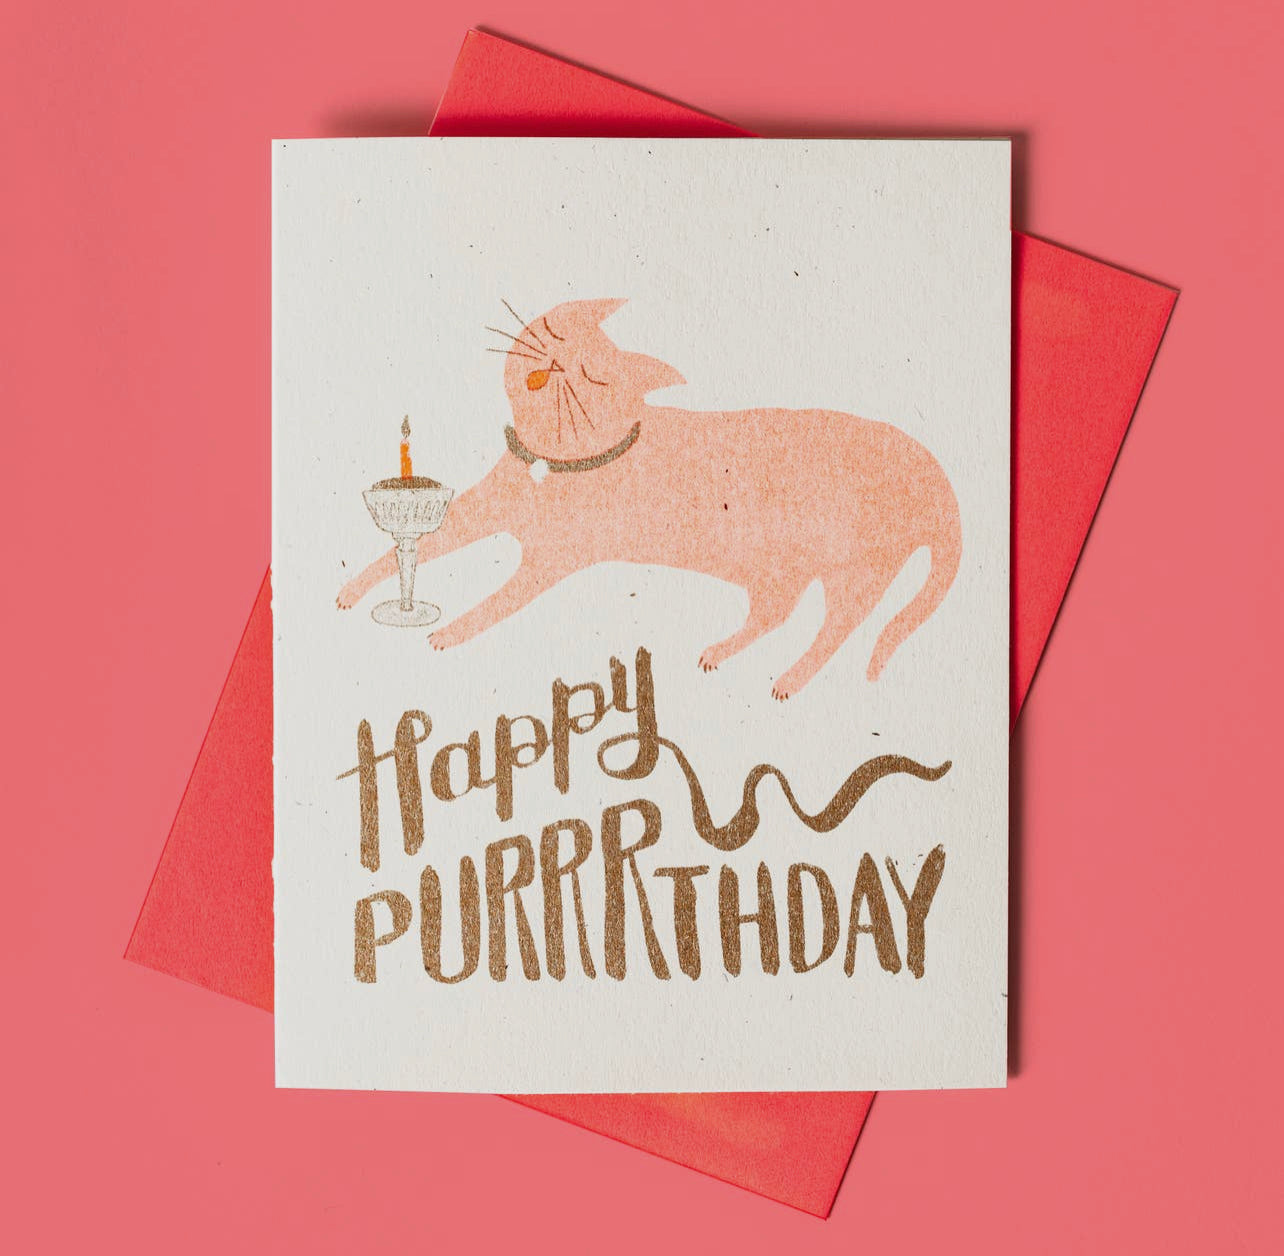 Happy Purrrthday - Risograph Card | Bromstad Printing Co.